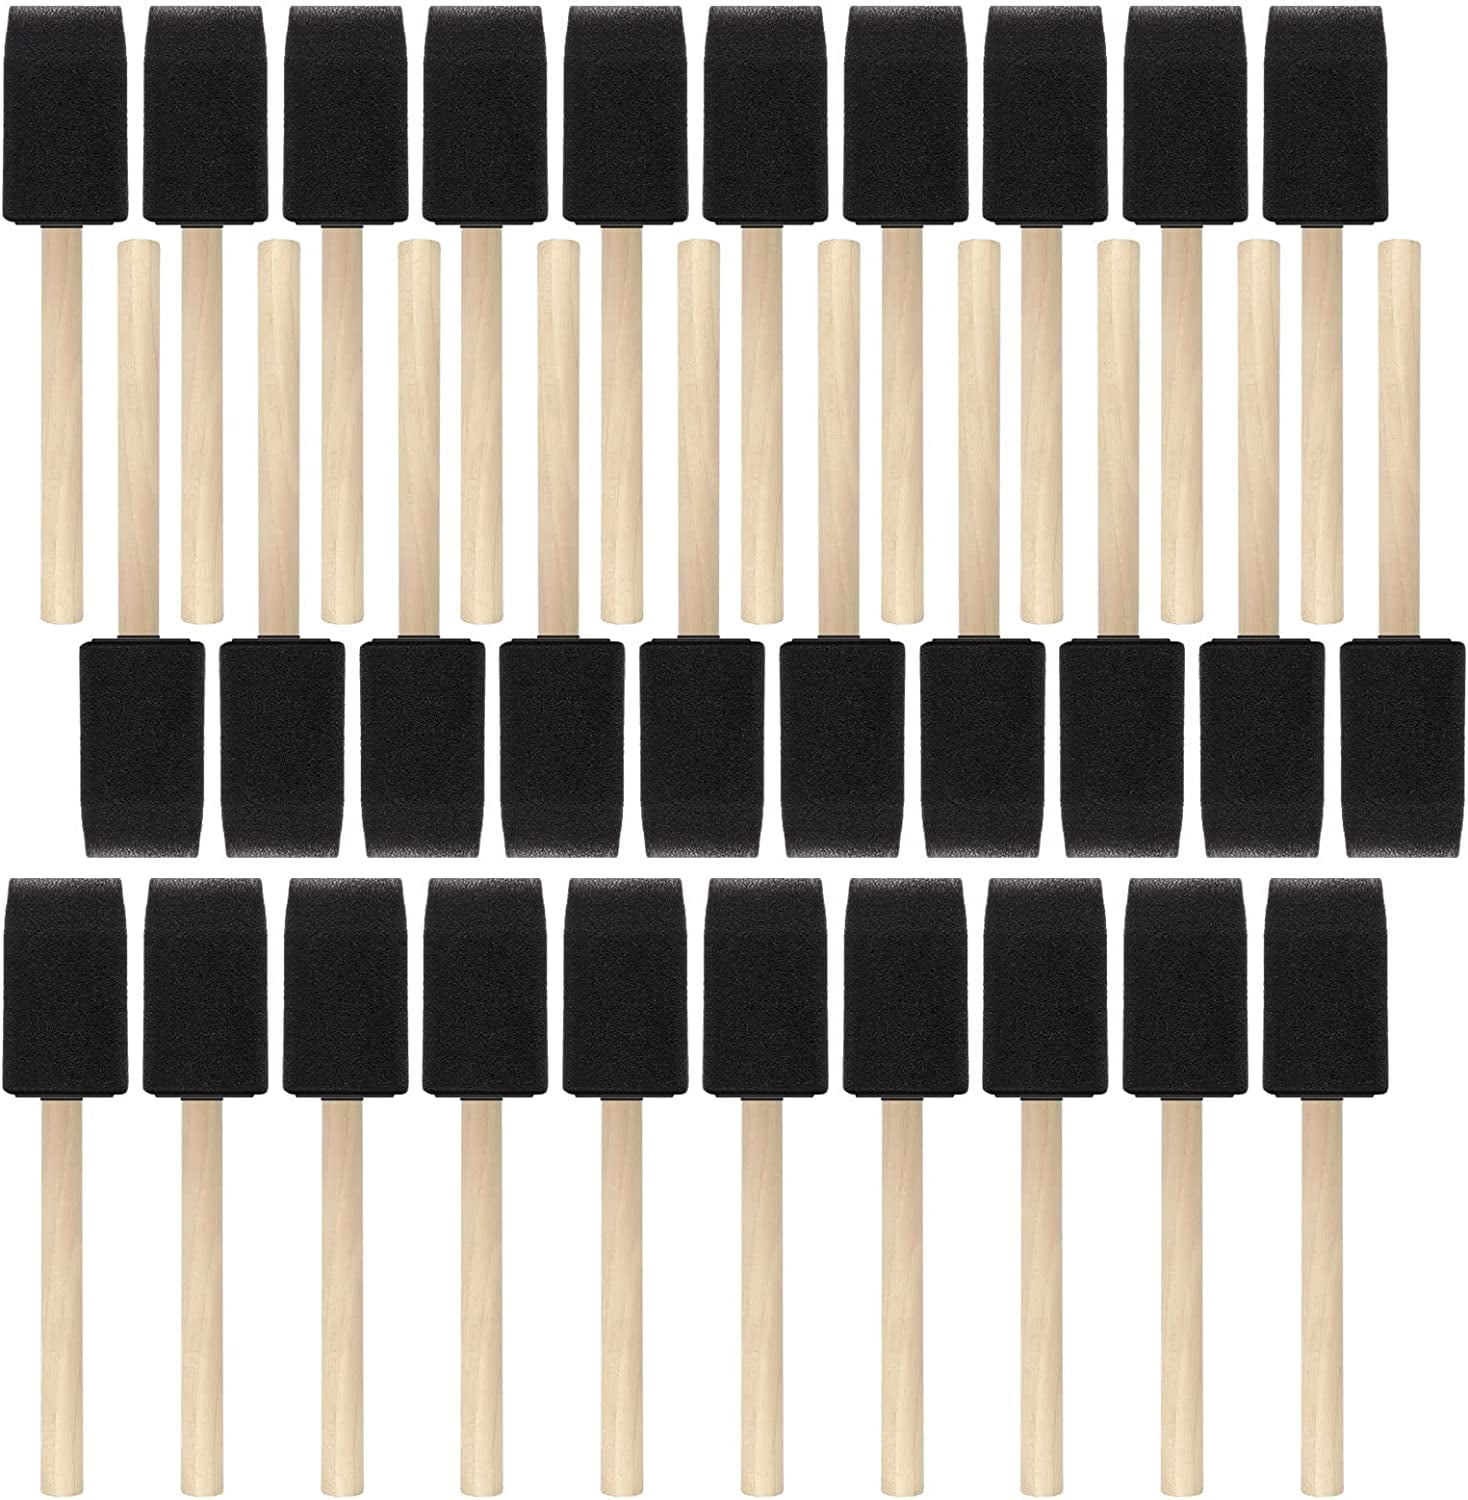 24 Pcs Foam Paint Brushes, Wood Handle Sponge Brushes for Painting,  Staining, Varnishes, and DIY Craft Projects (1, 2 and 3)